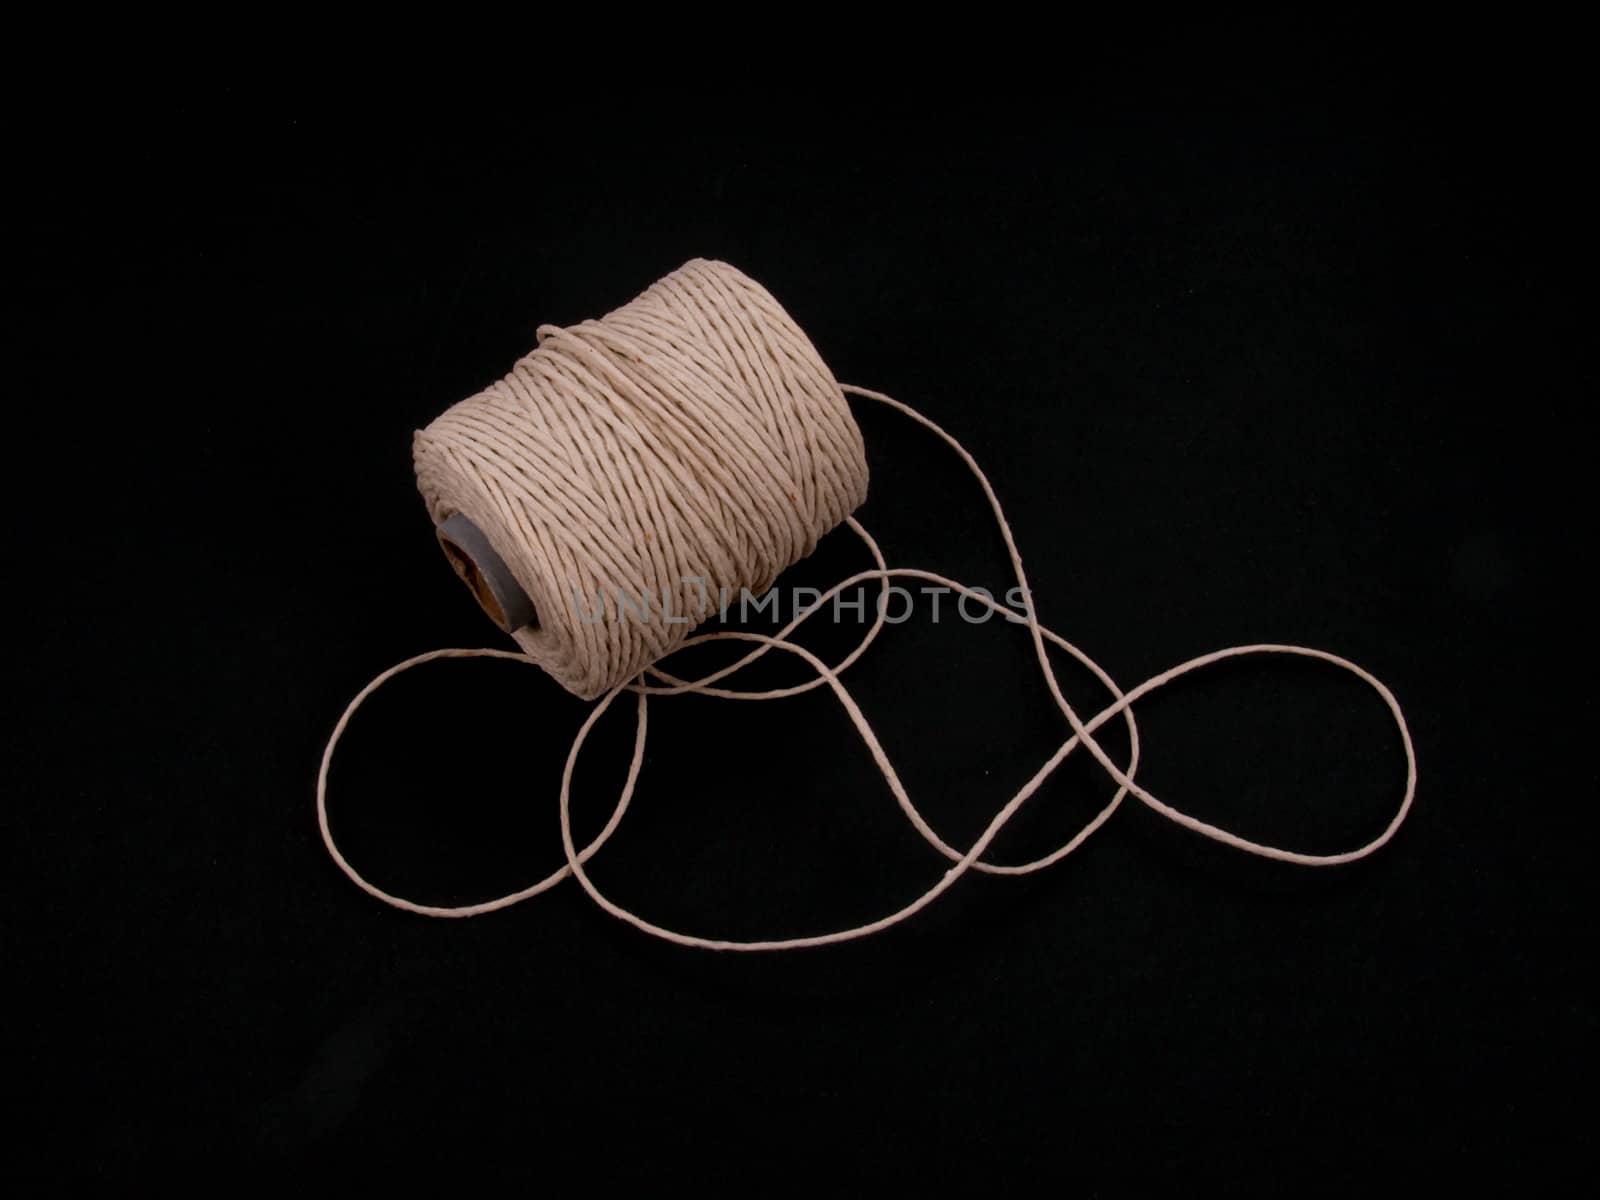 Ball of string or twine on a plain black background. by ianlangley